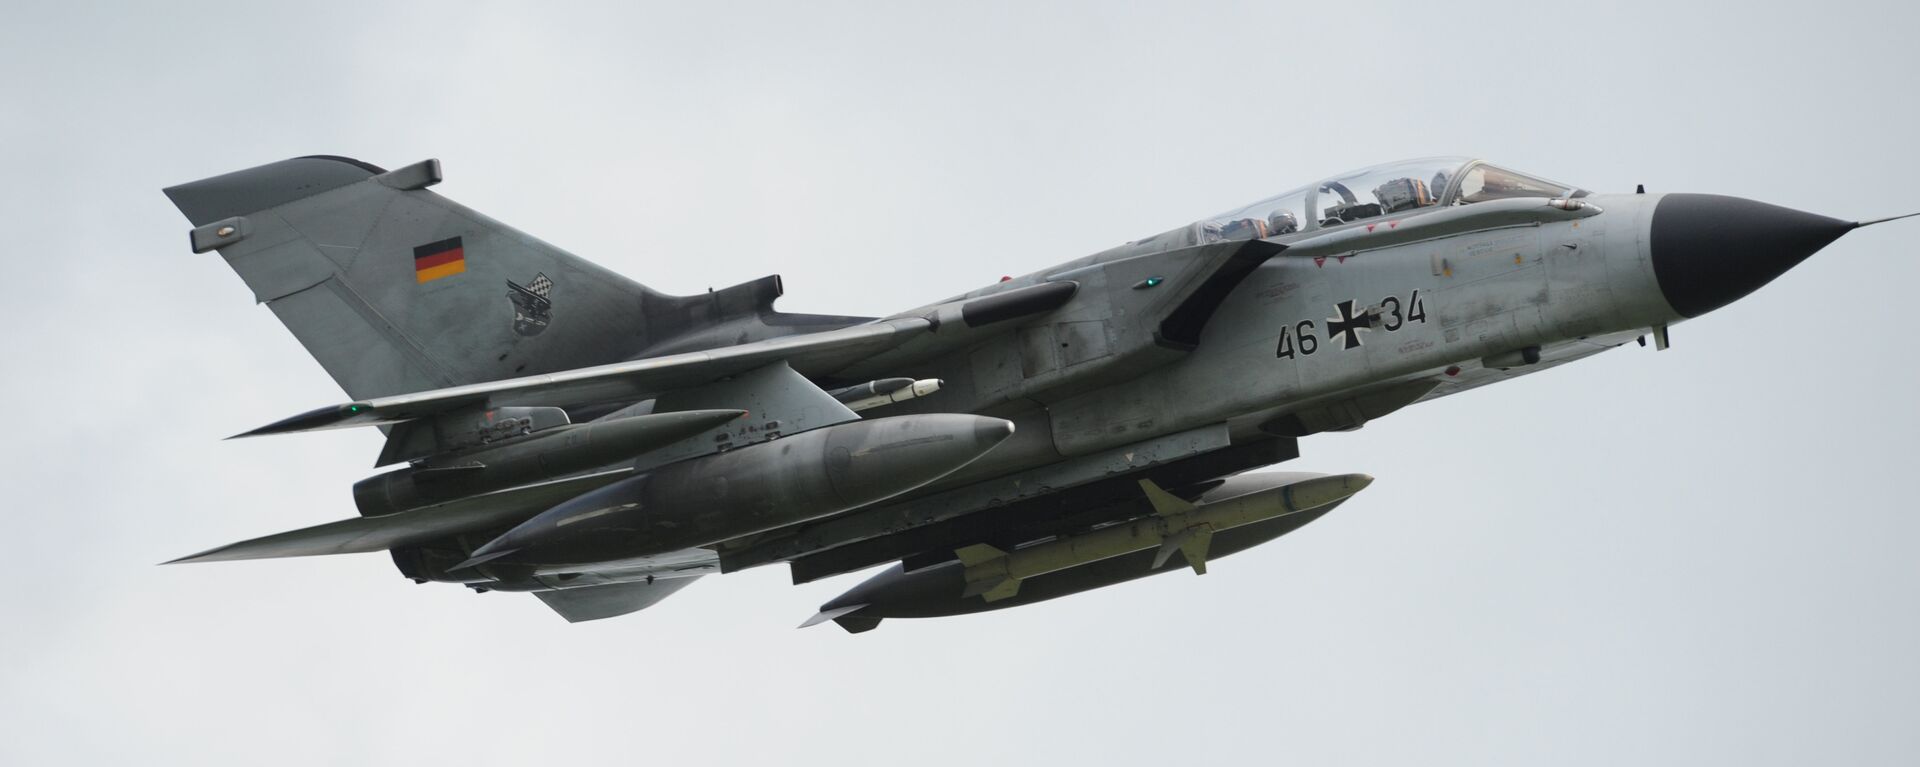 Picture taken on June 22, 2010 shows a Tornado fighter bomber of the German armed forces Bundeswehr during an exercise near Messstetten, southern Germany. - 俄羅斯衛星通訊社, 1920, 19.10.2019